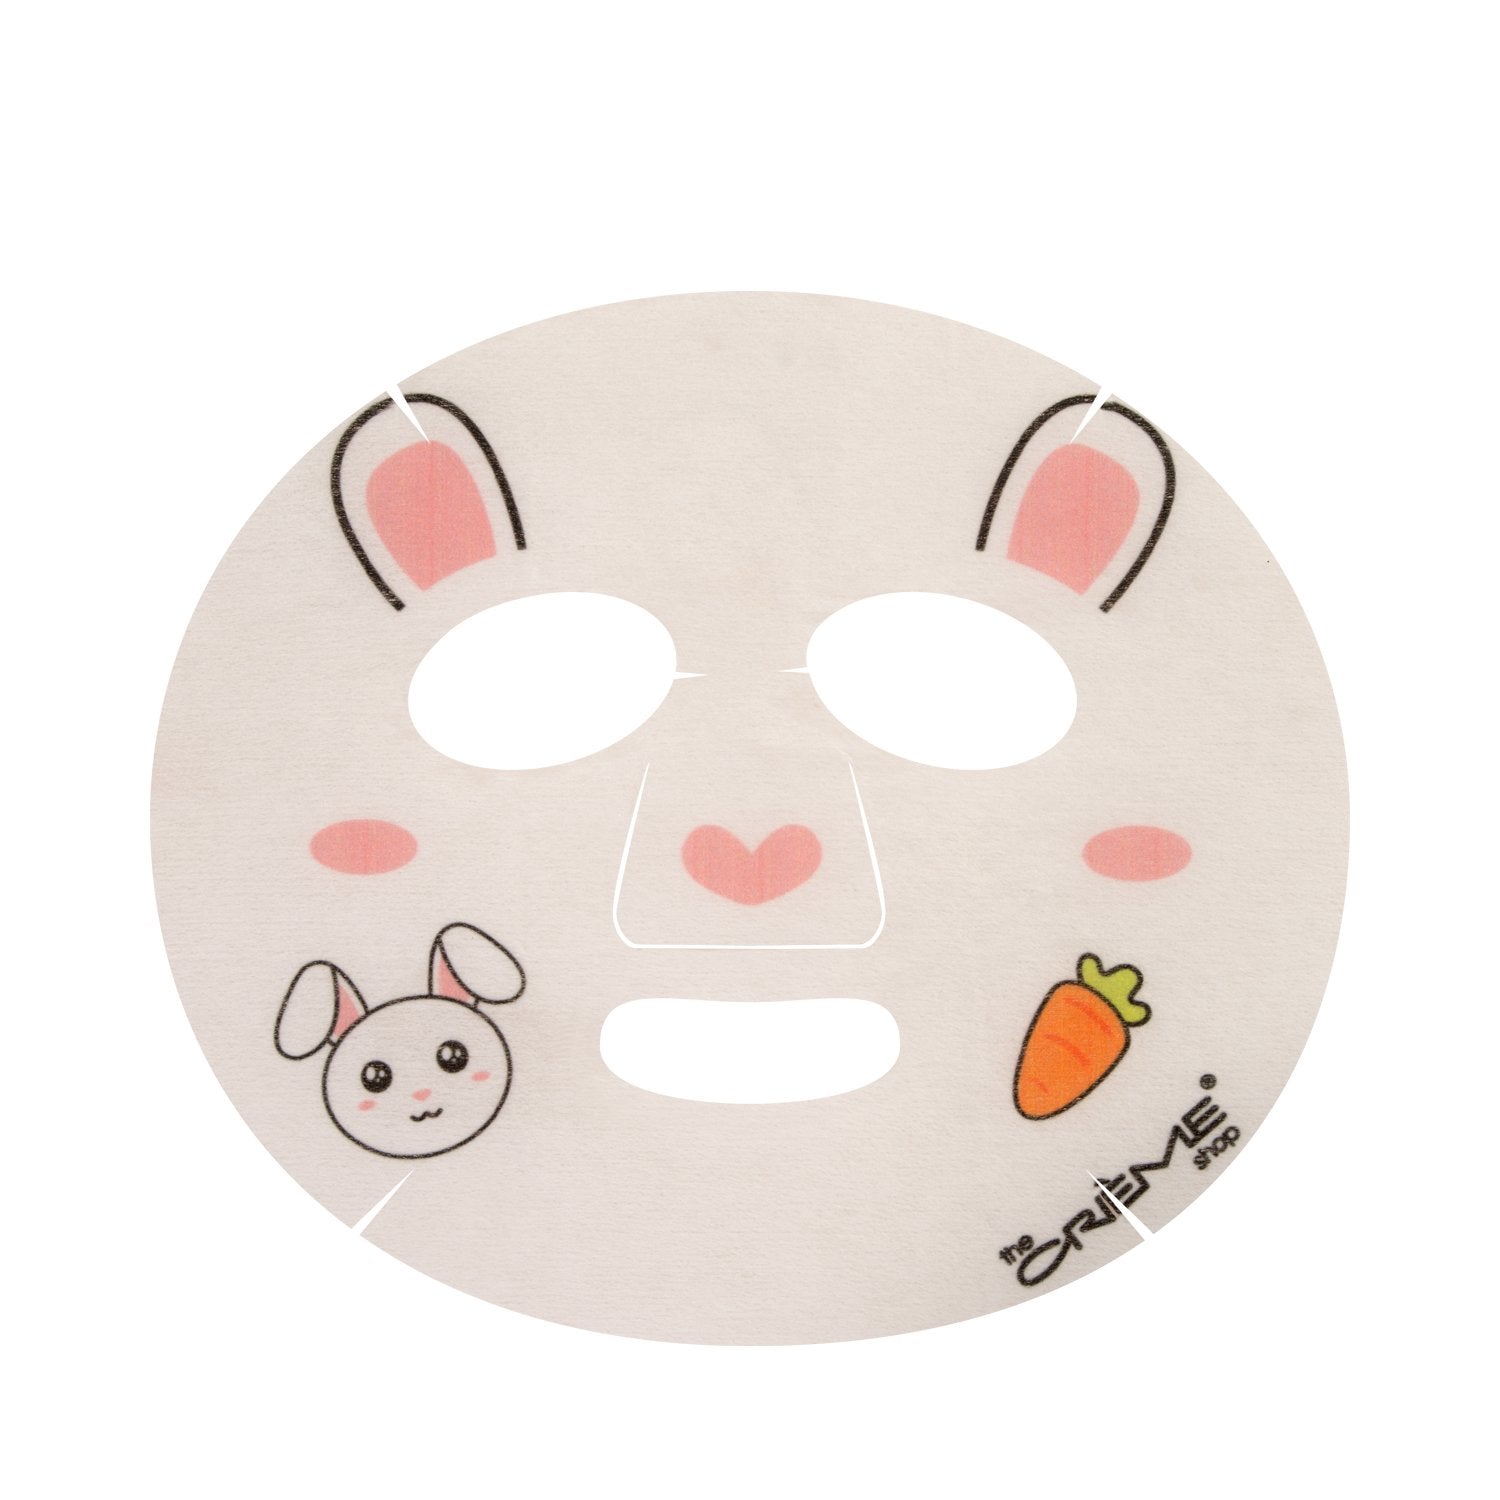 Be Hydrated, Skin! Animated Bunny Face Mask - Moisturizing Hyaluronic Acid - The Crème Shop